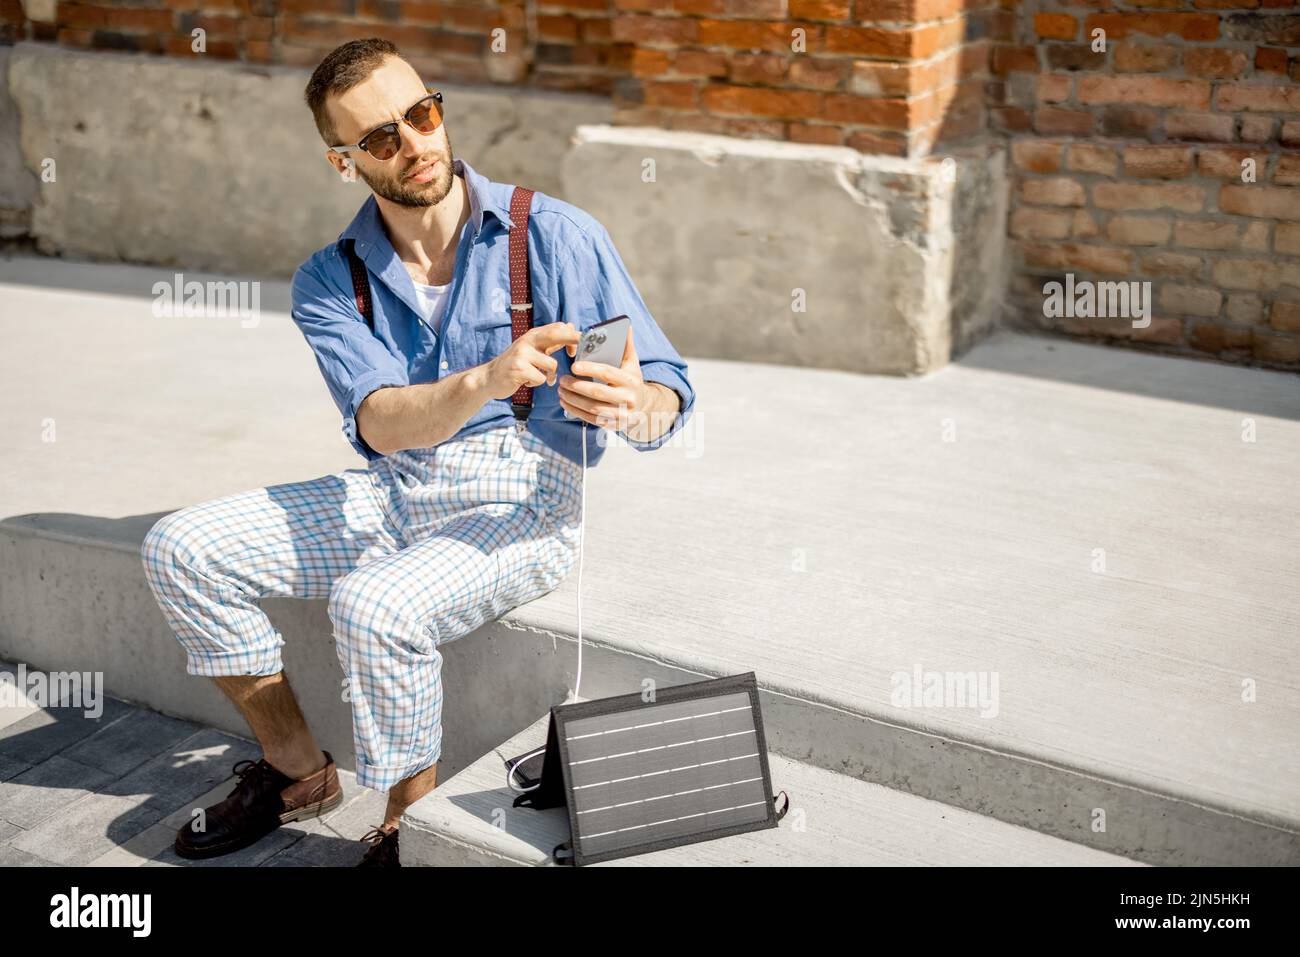 Stylish man use smart phone and charge it from portable solar panel while sitting on street outdoors. Modern sustainable lifestyle and renewable energ Stock Photo